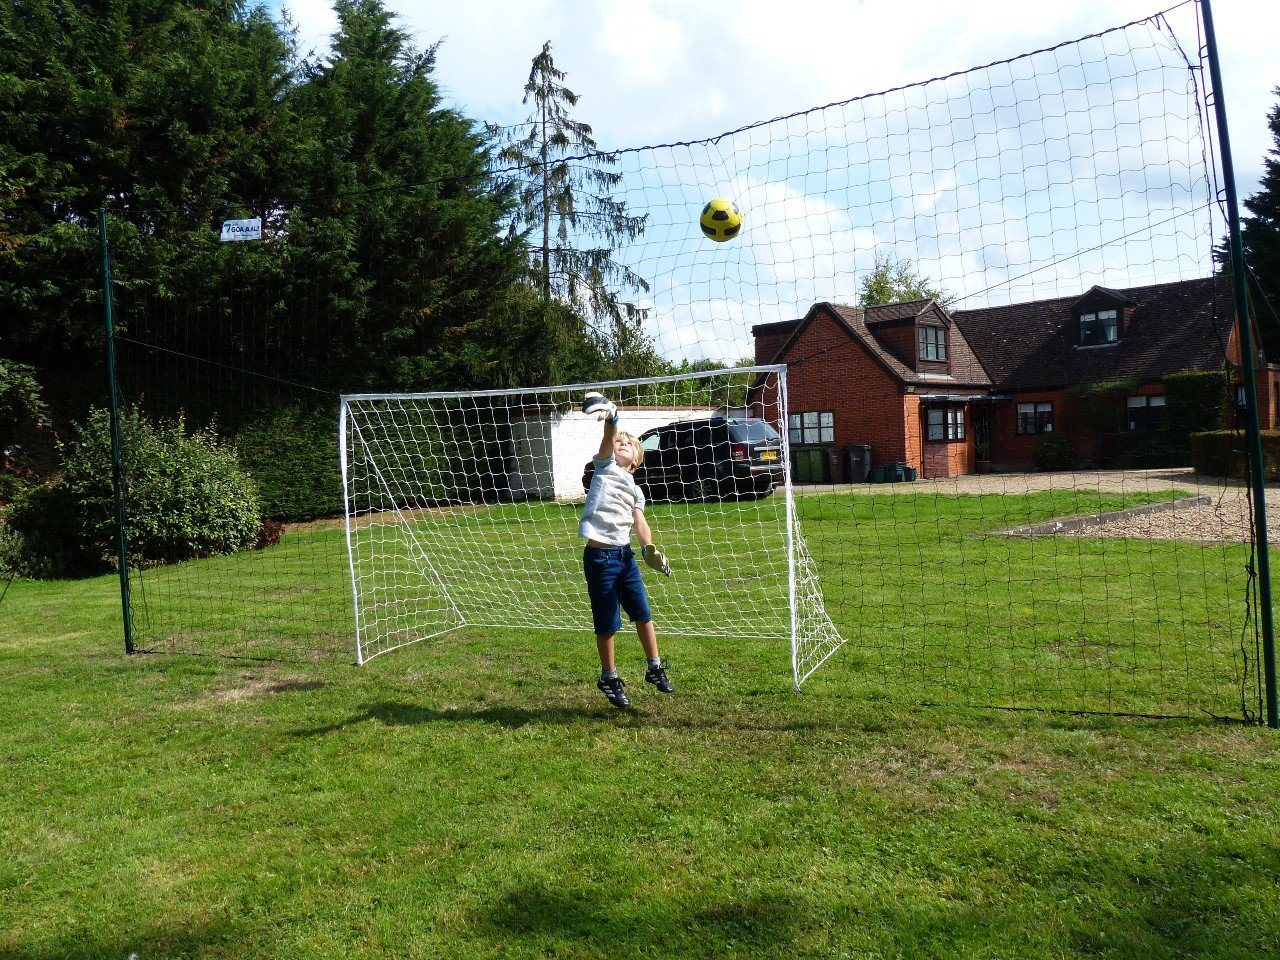 Rebounding Soccer Nets: Control the Ball, Control the Game